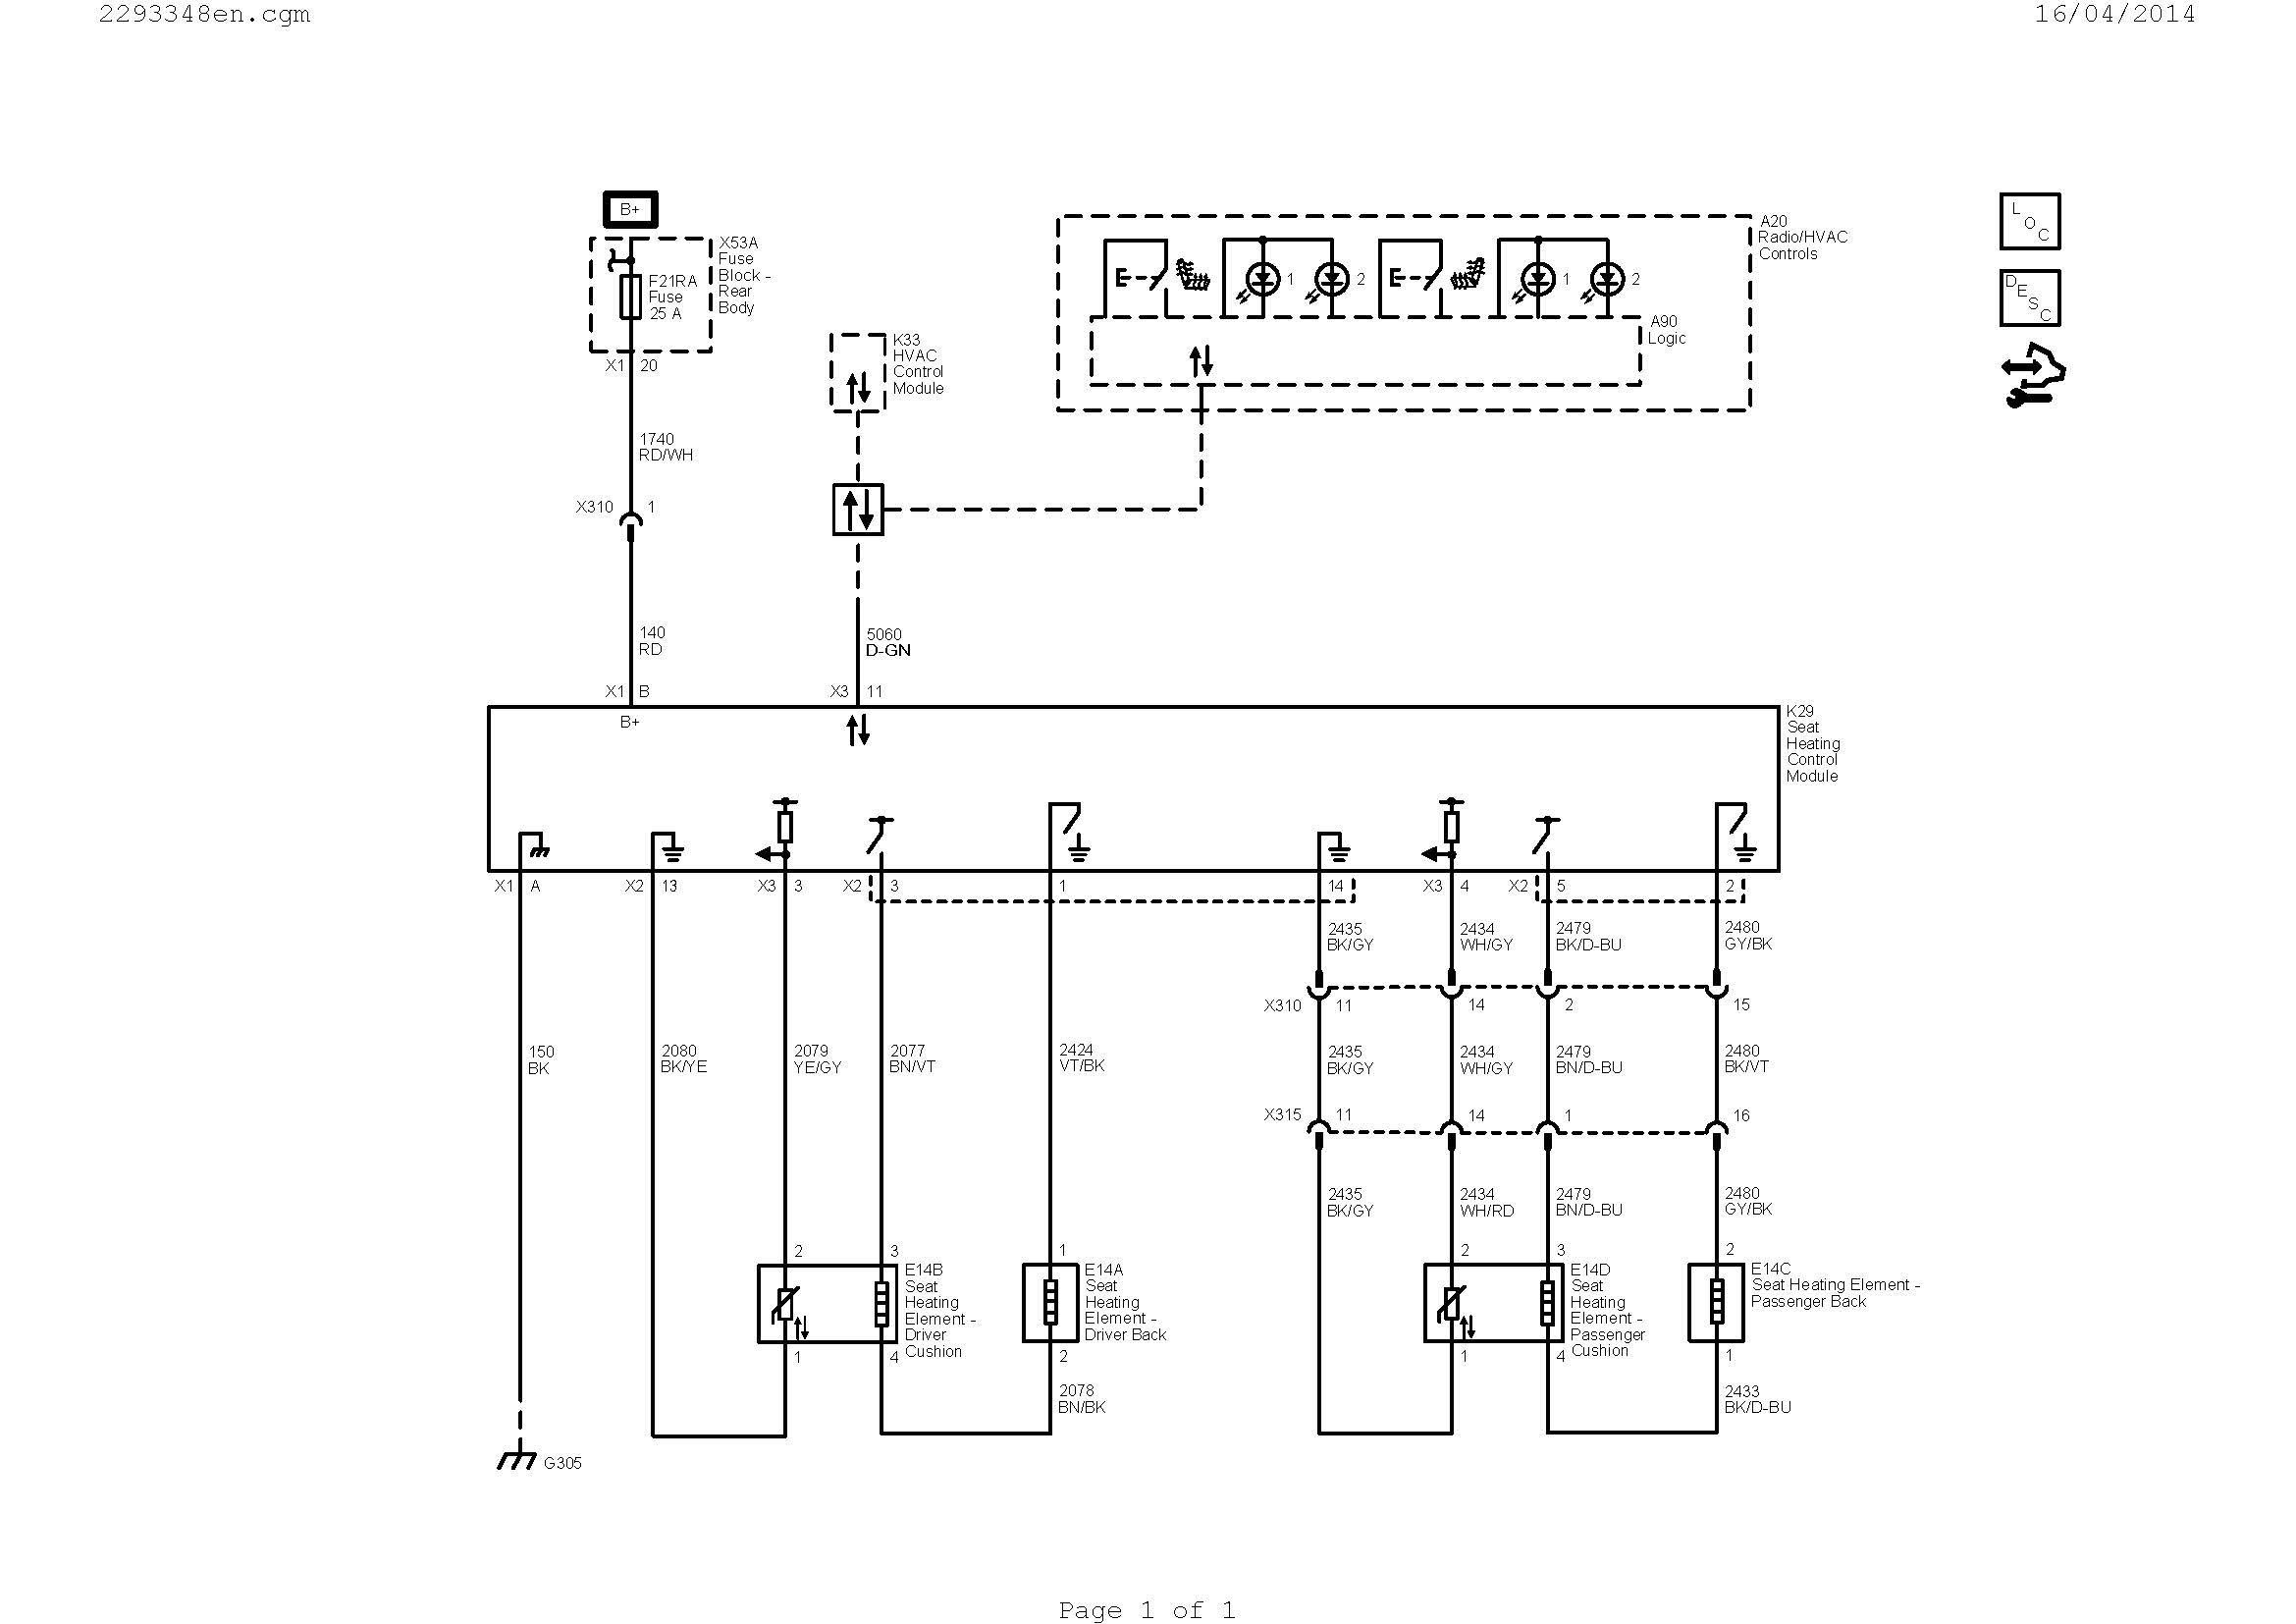 Wiring Diagram Relay Power Window Fresh Wiring Schematic for Alternating Relay Wiring Diagram Collections